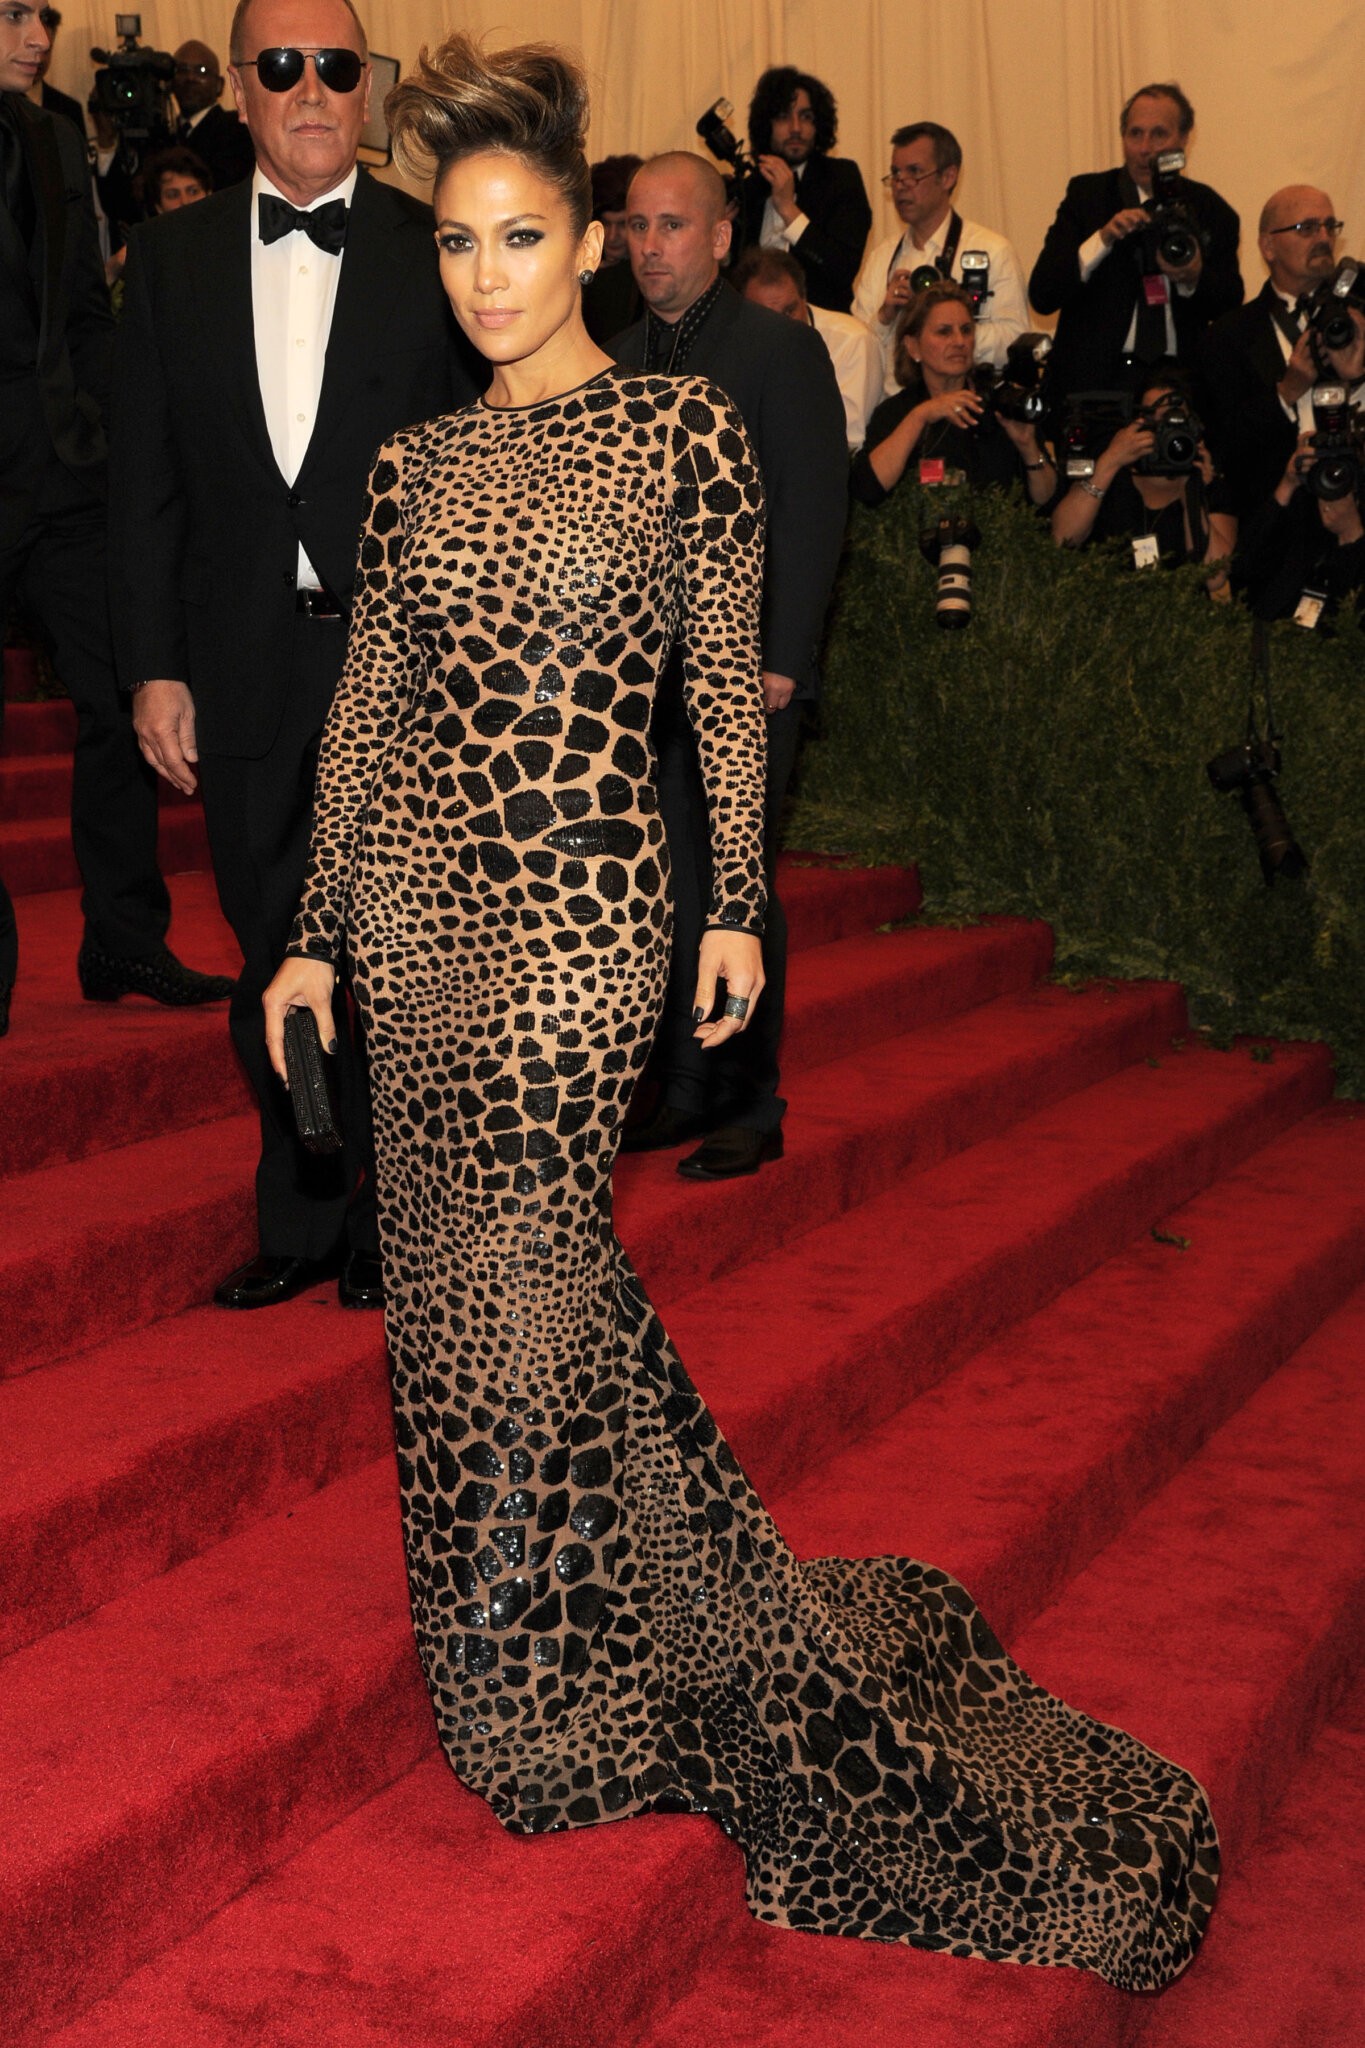 Jennifer Lopez wears Michael Kors for "PUNK: Chaos to Couture" at the 2013 Met Gala